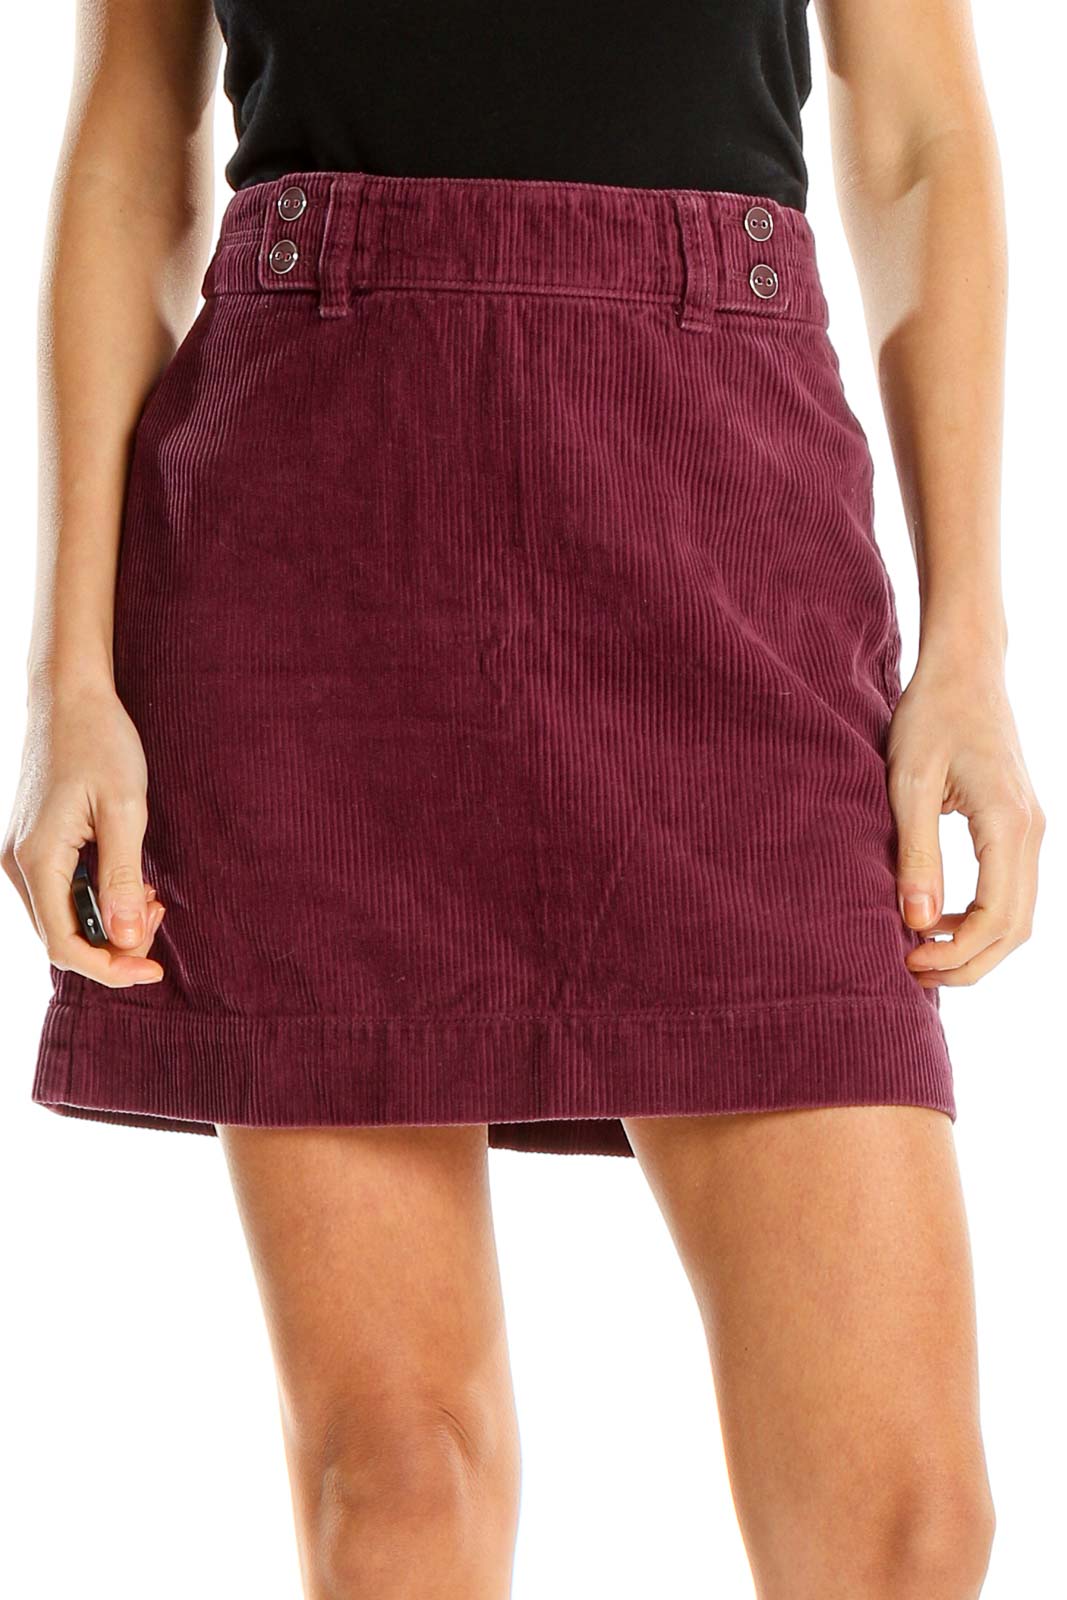 Purple Chic Corduroy A-Line Skirt Front